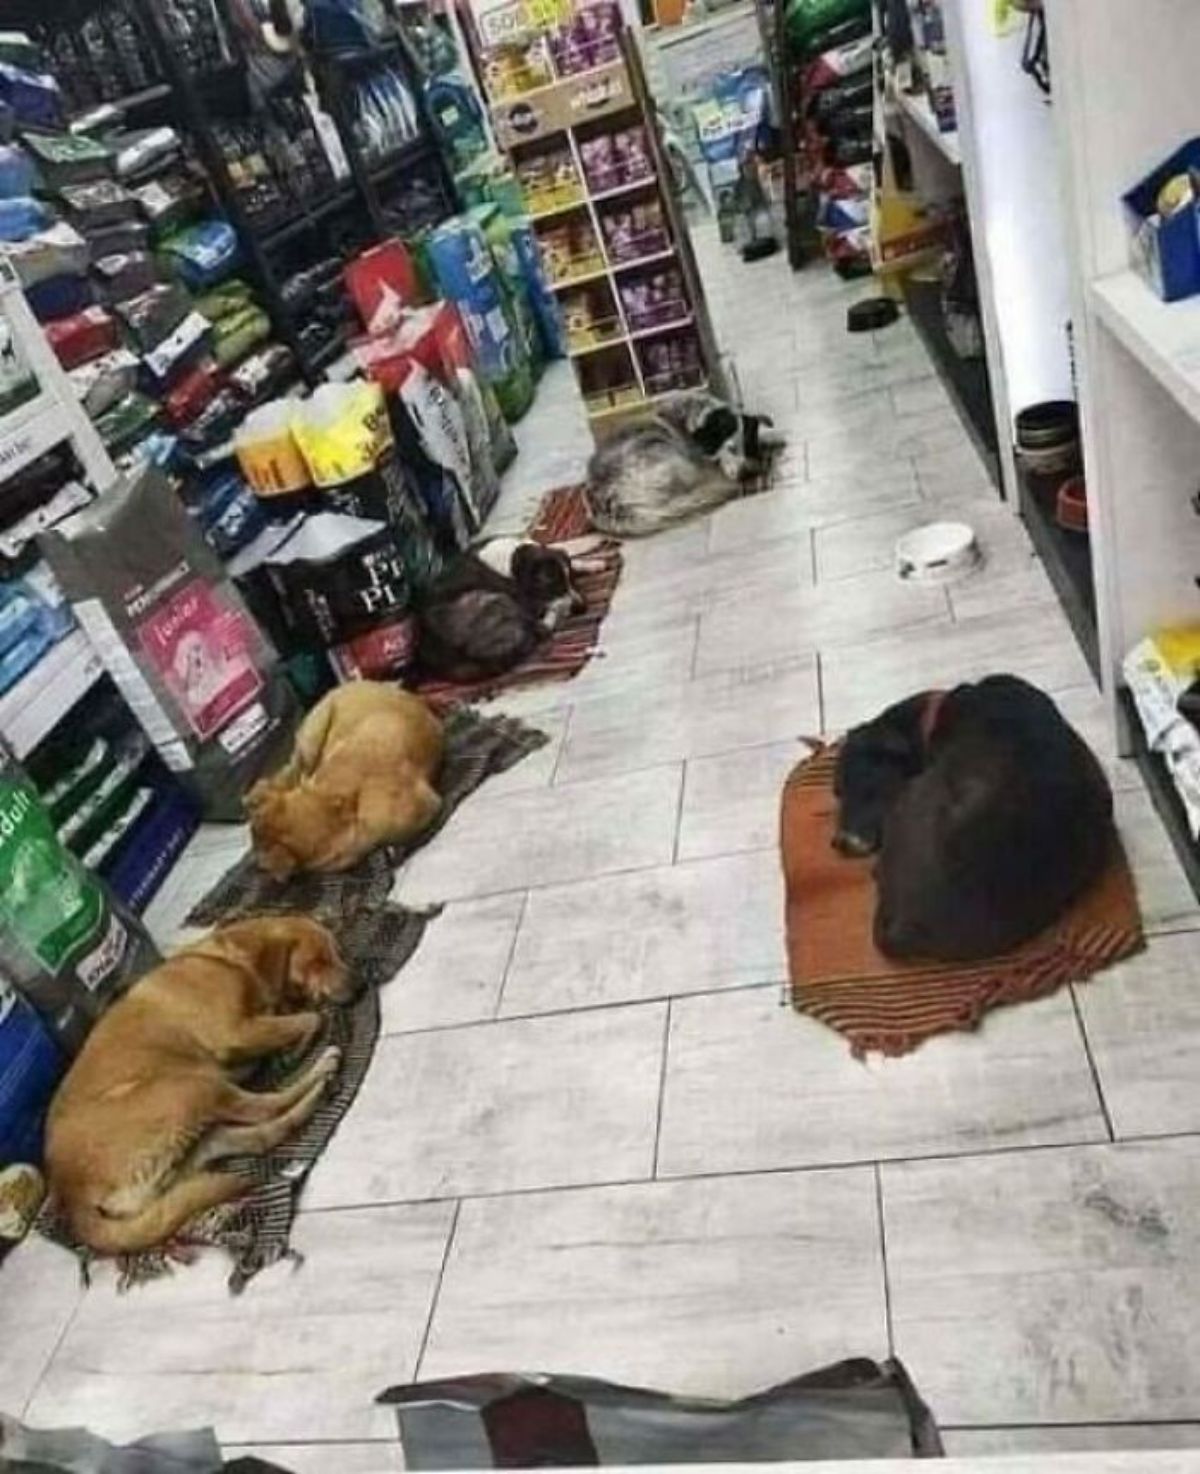 2 brown dogs, 1 brown and white dog, 1 black and white dog and 1 black dog sleeping on rugs inside a shop